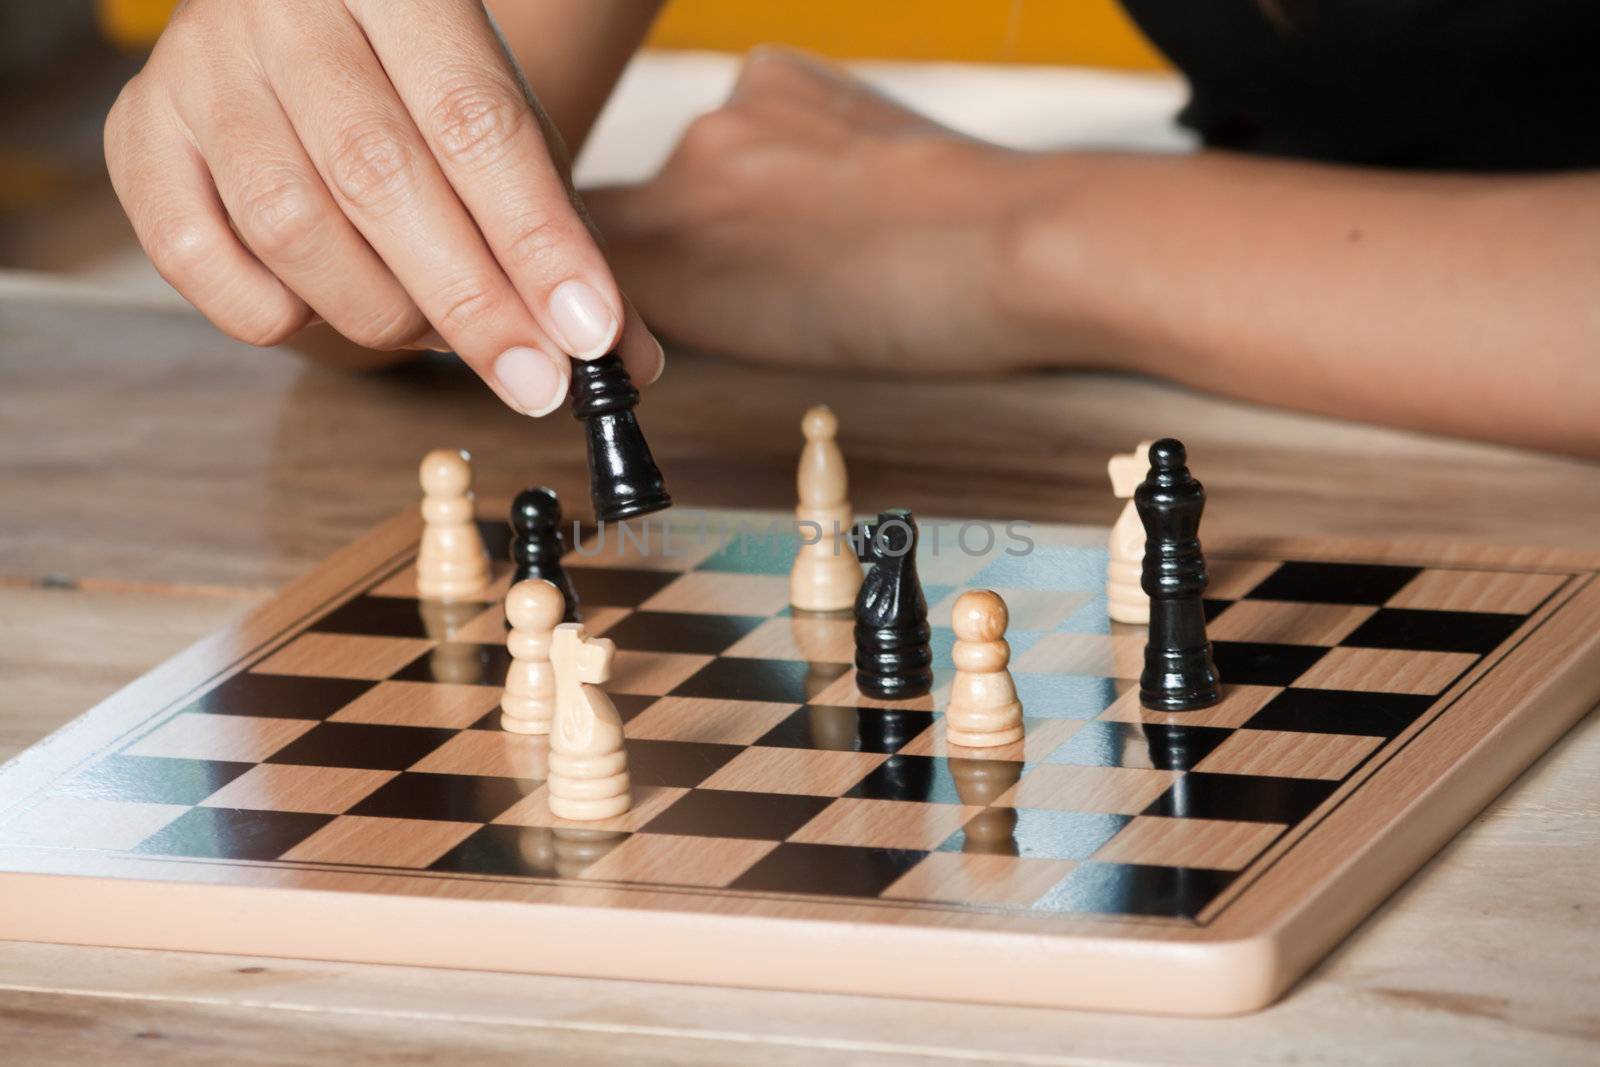 Moving chess by artemisphoto